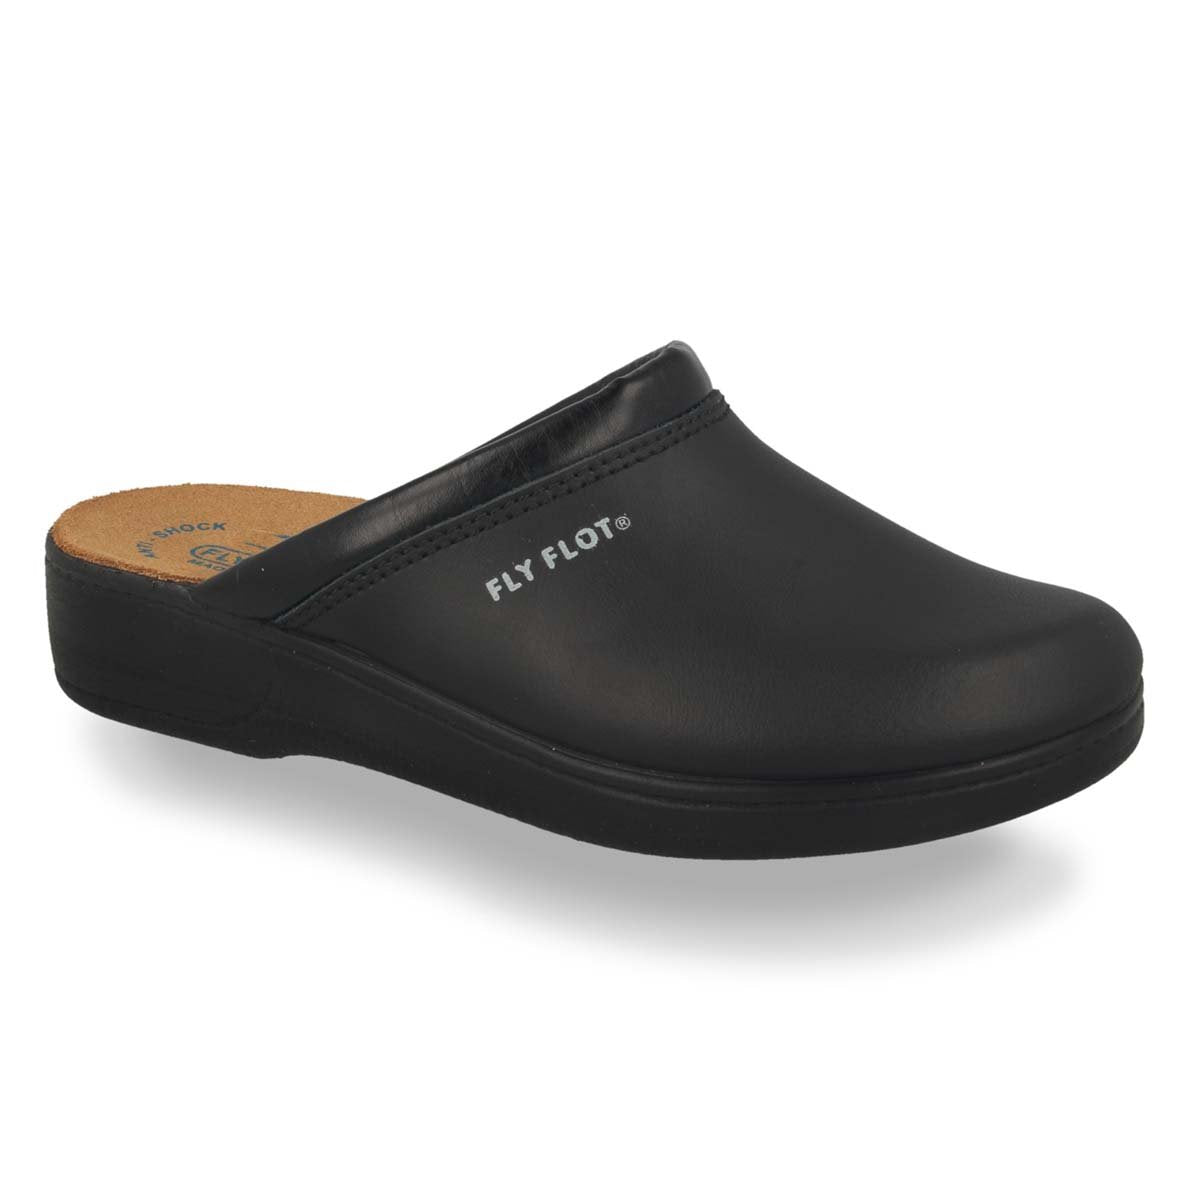 Photo of the Leather Man Slipper Black (28093bc)